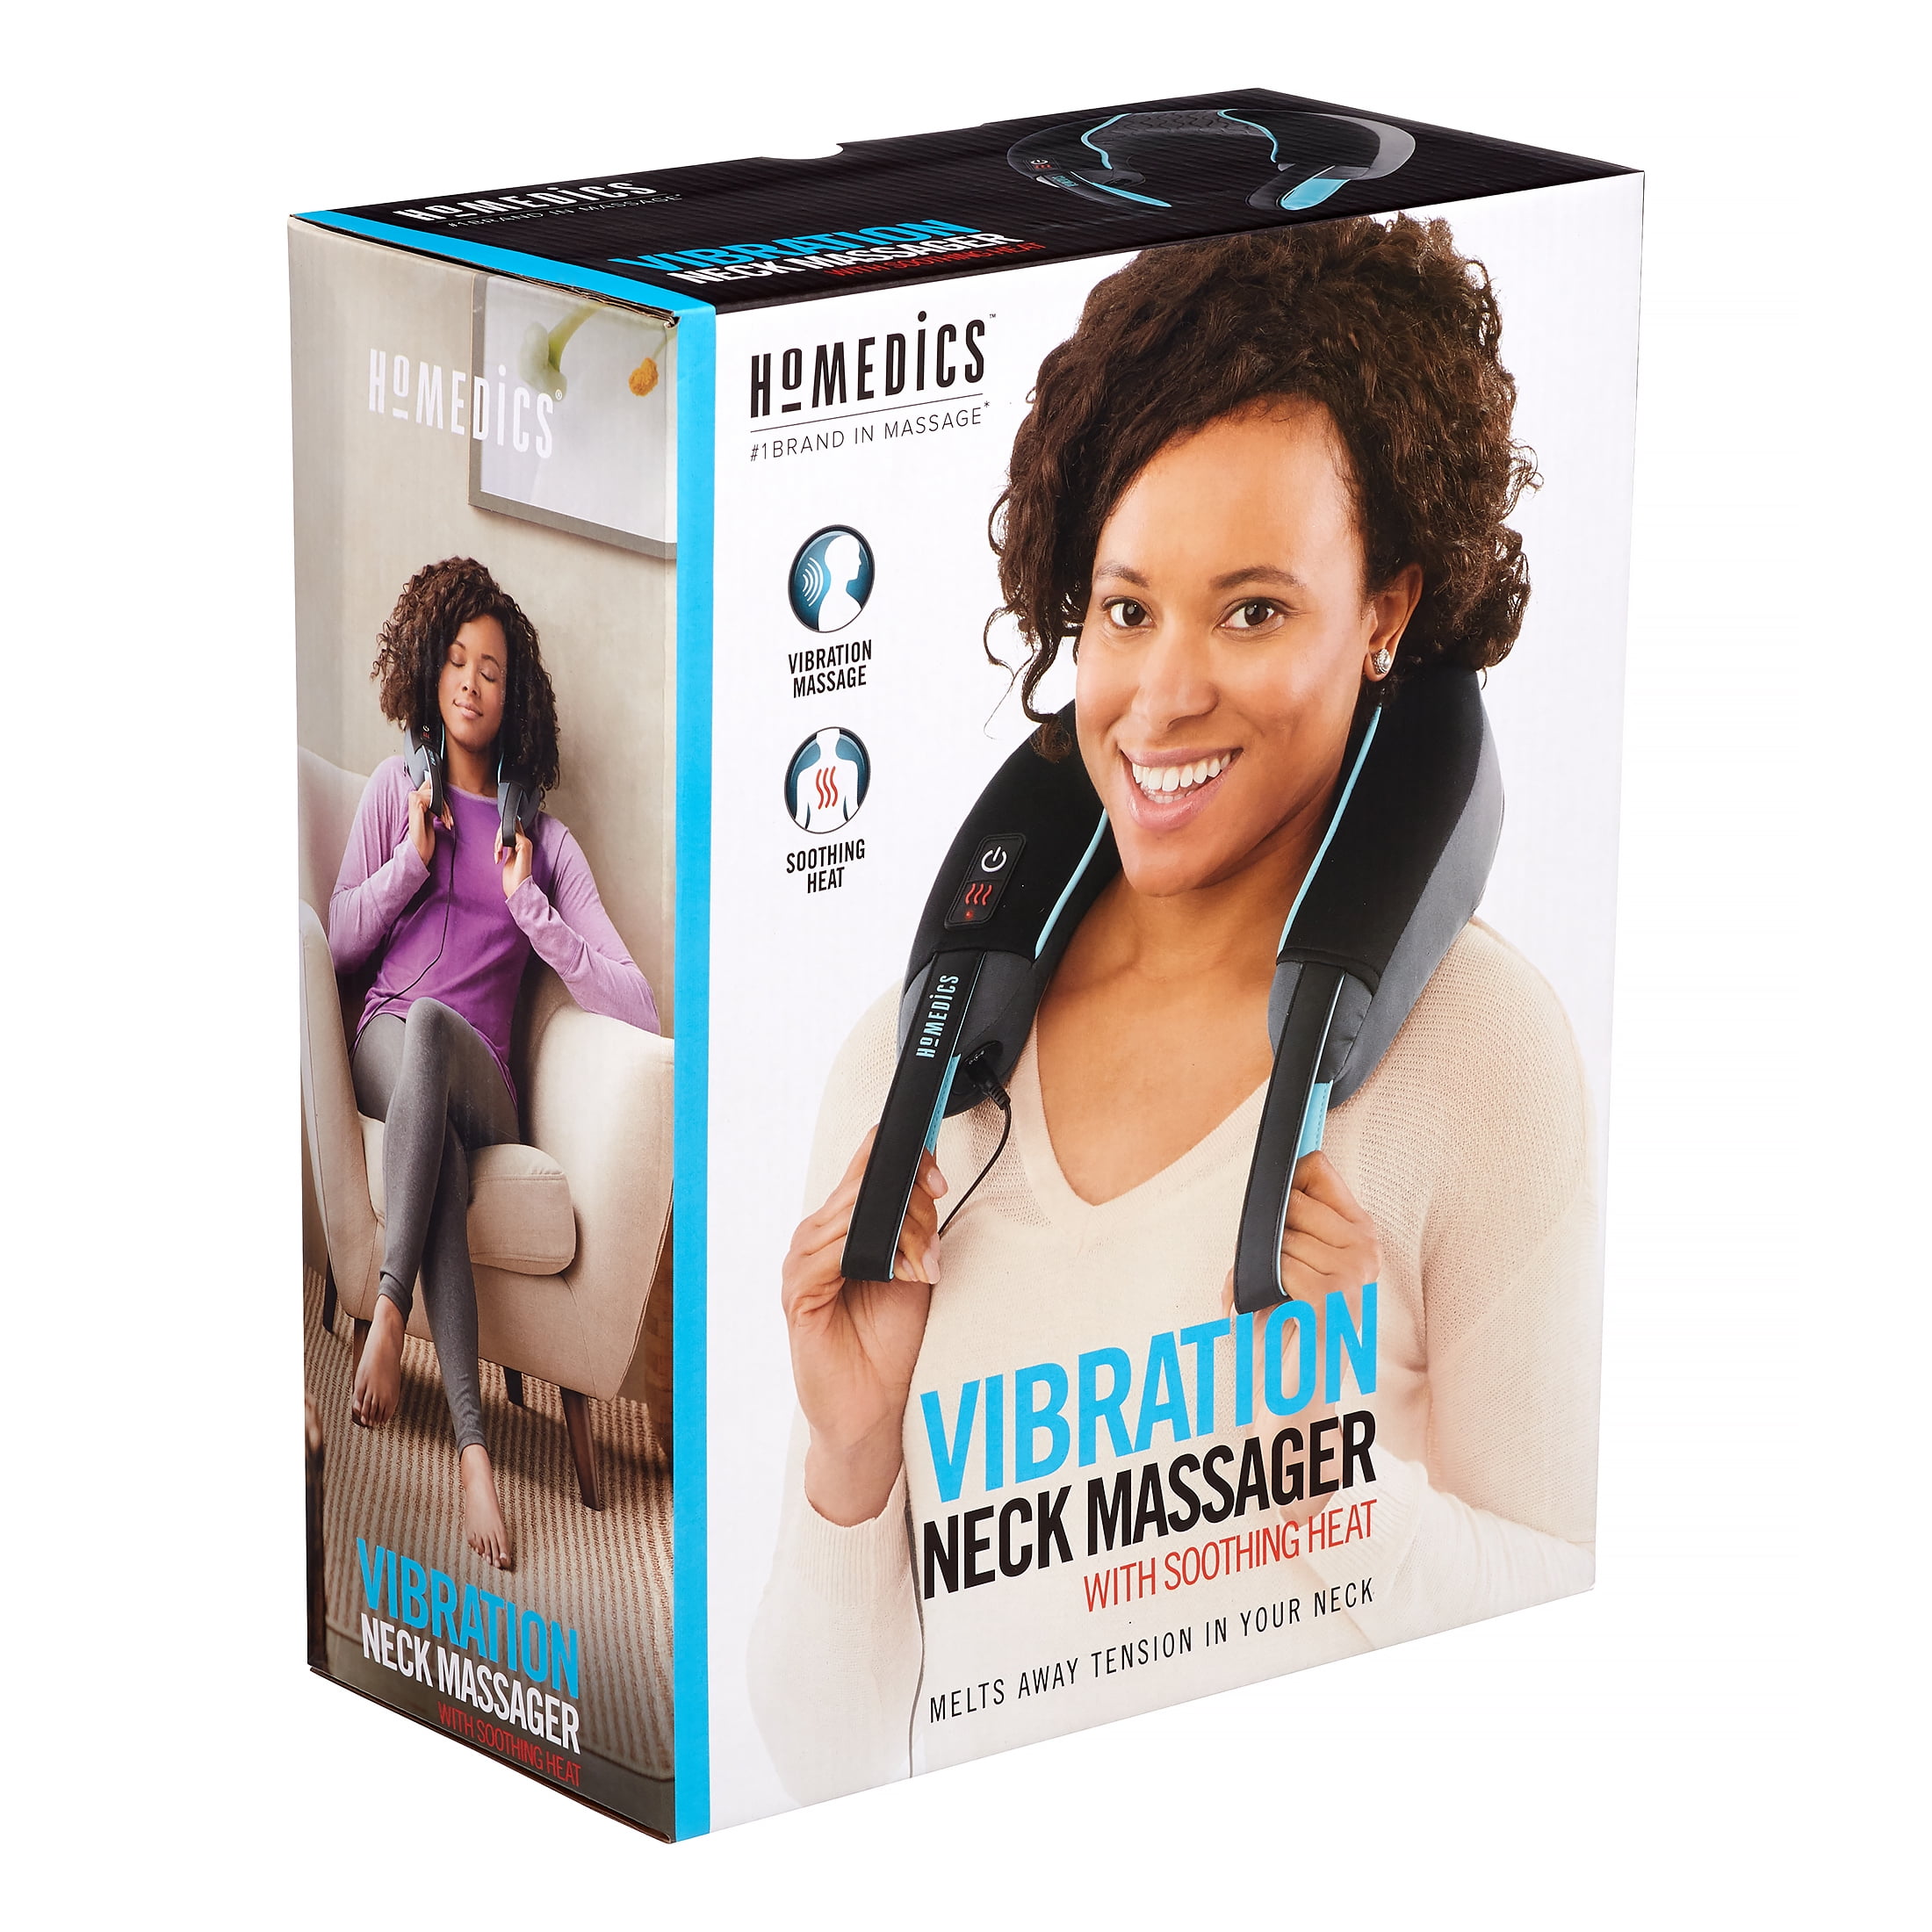 Homedics Cordless Neck & Shoulder Massager with Heat NMS-730H, MN HOME  OUTLET BURNSVILLE #173 - SATURDAY PICK UP ONLY! 10:00AM - 2:00PM NO  EXCEPTIONS!!!!